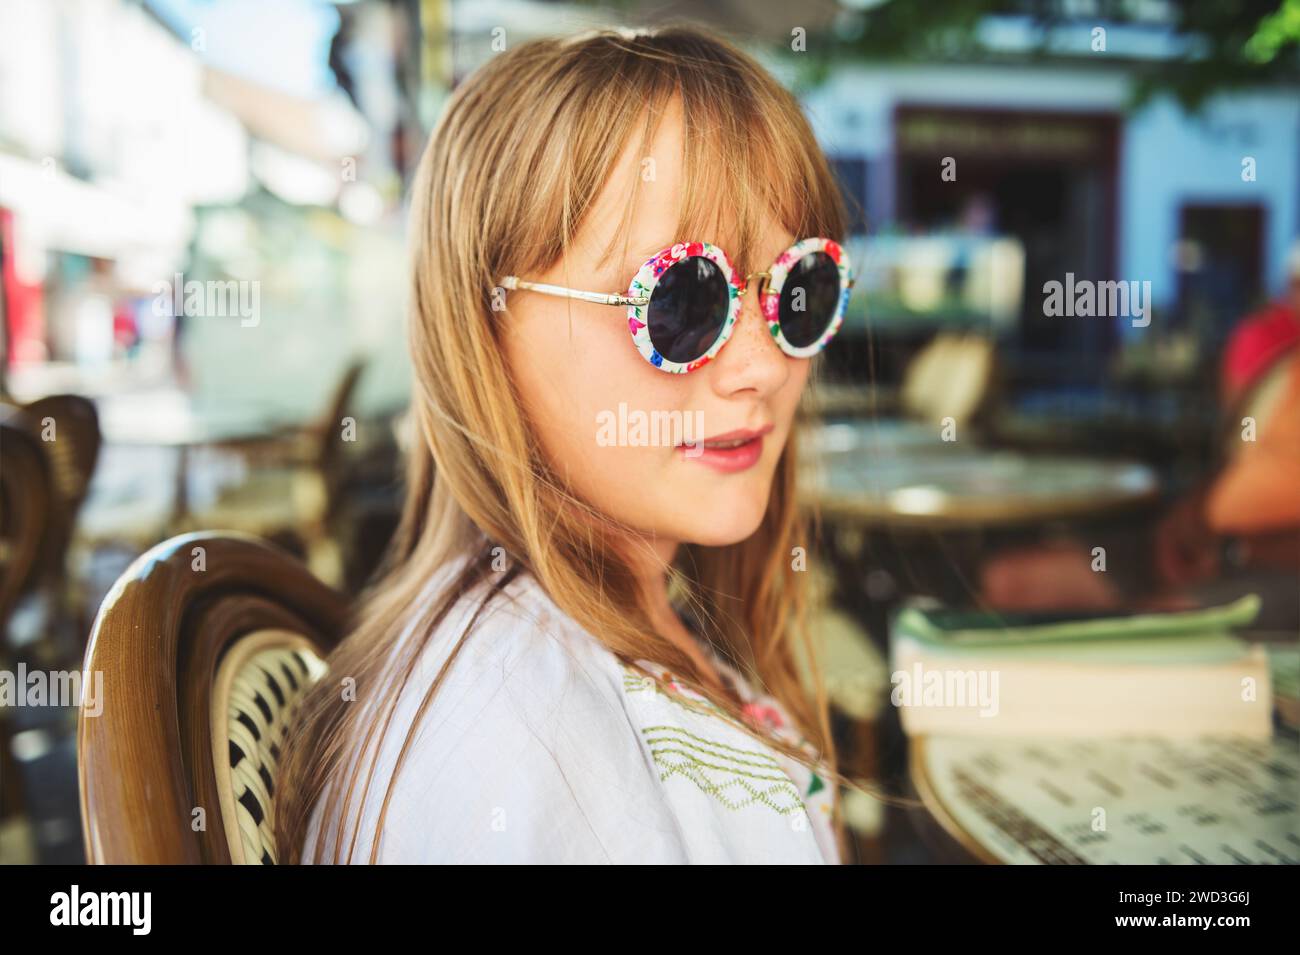 Outdoor close up portrait of adorable little girl wearing modern sunglasses Stock Photo